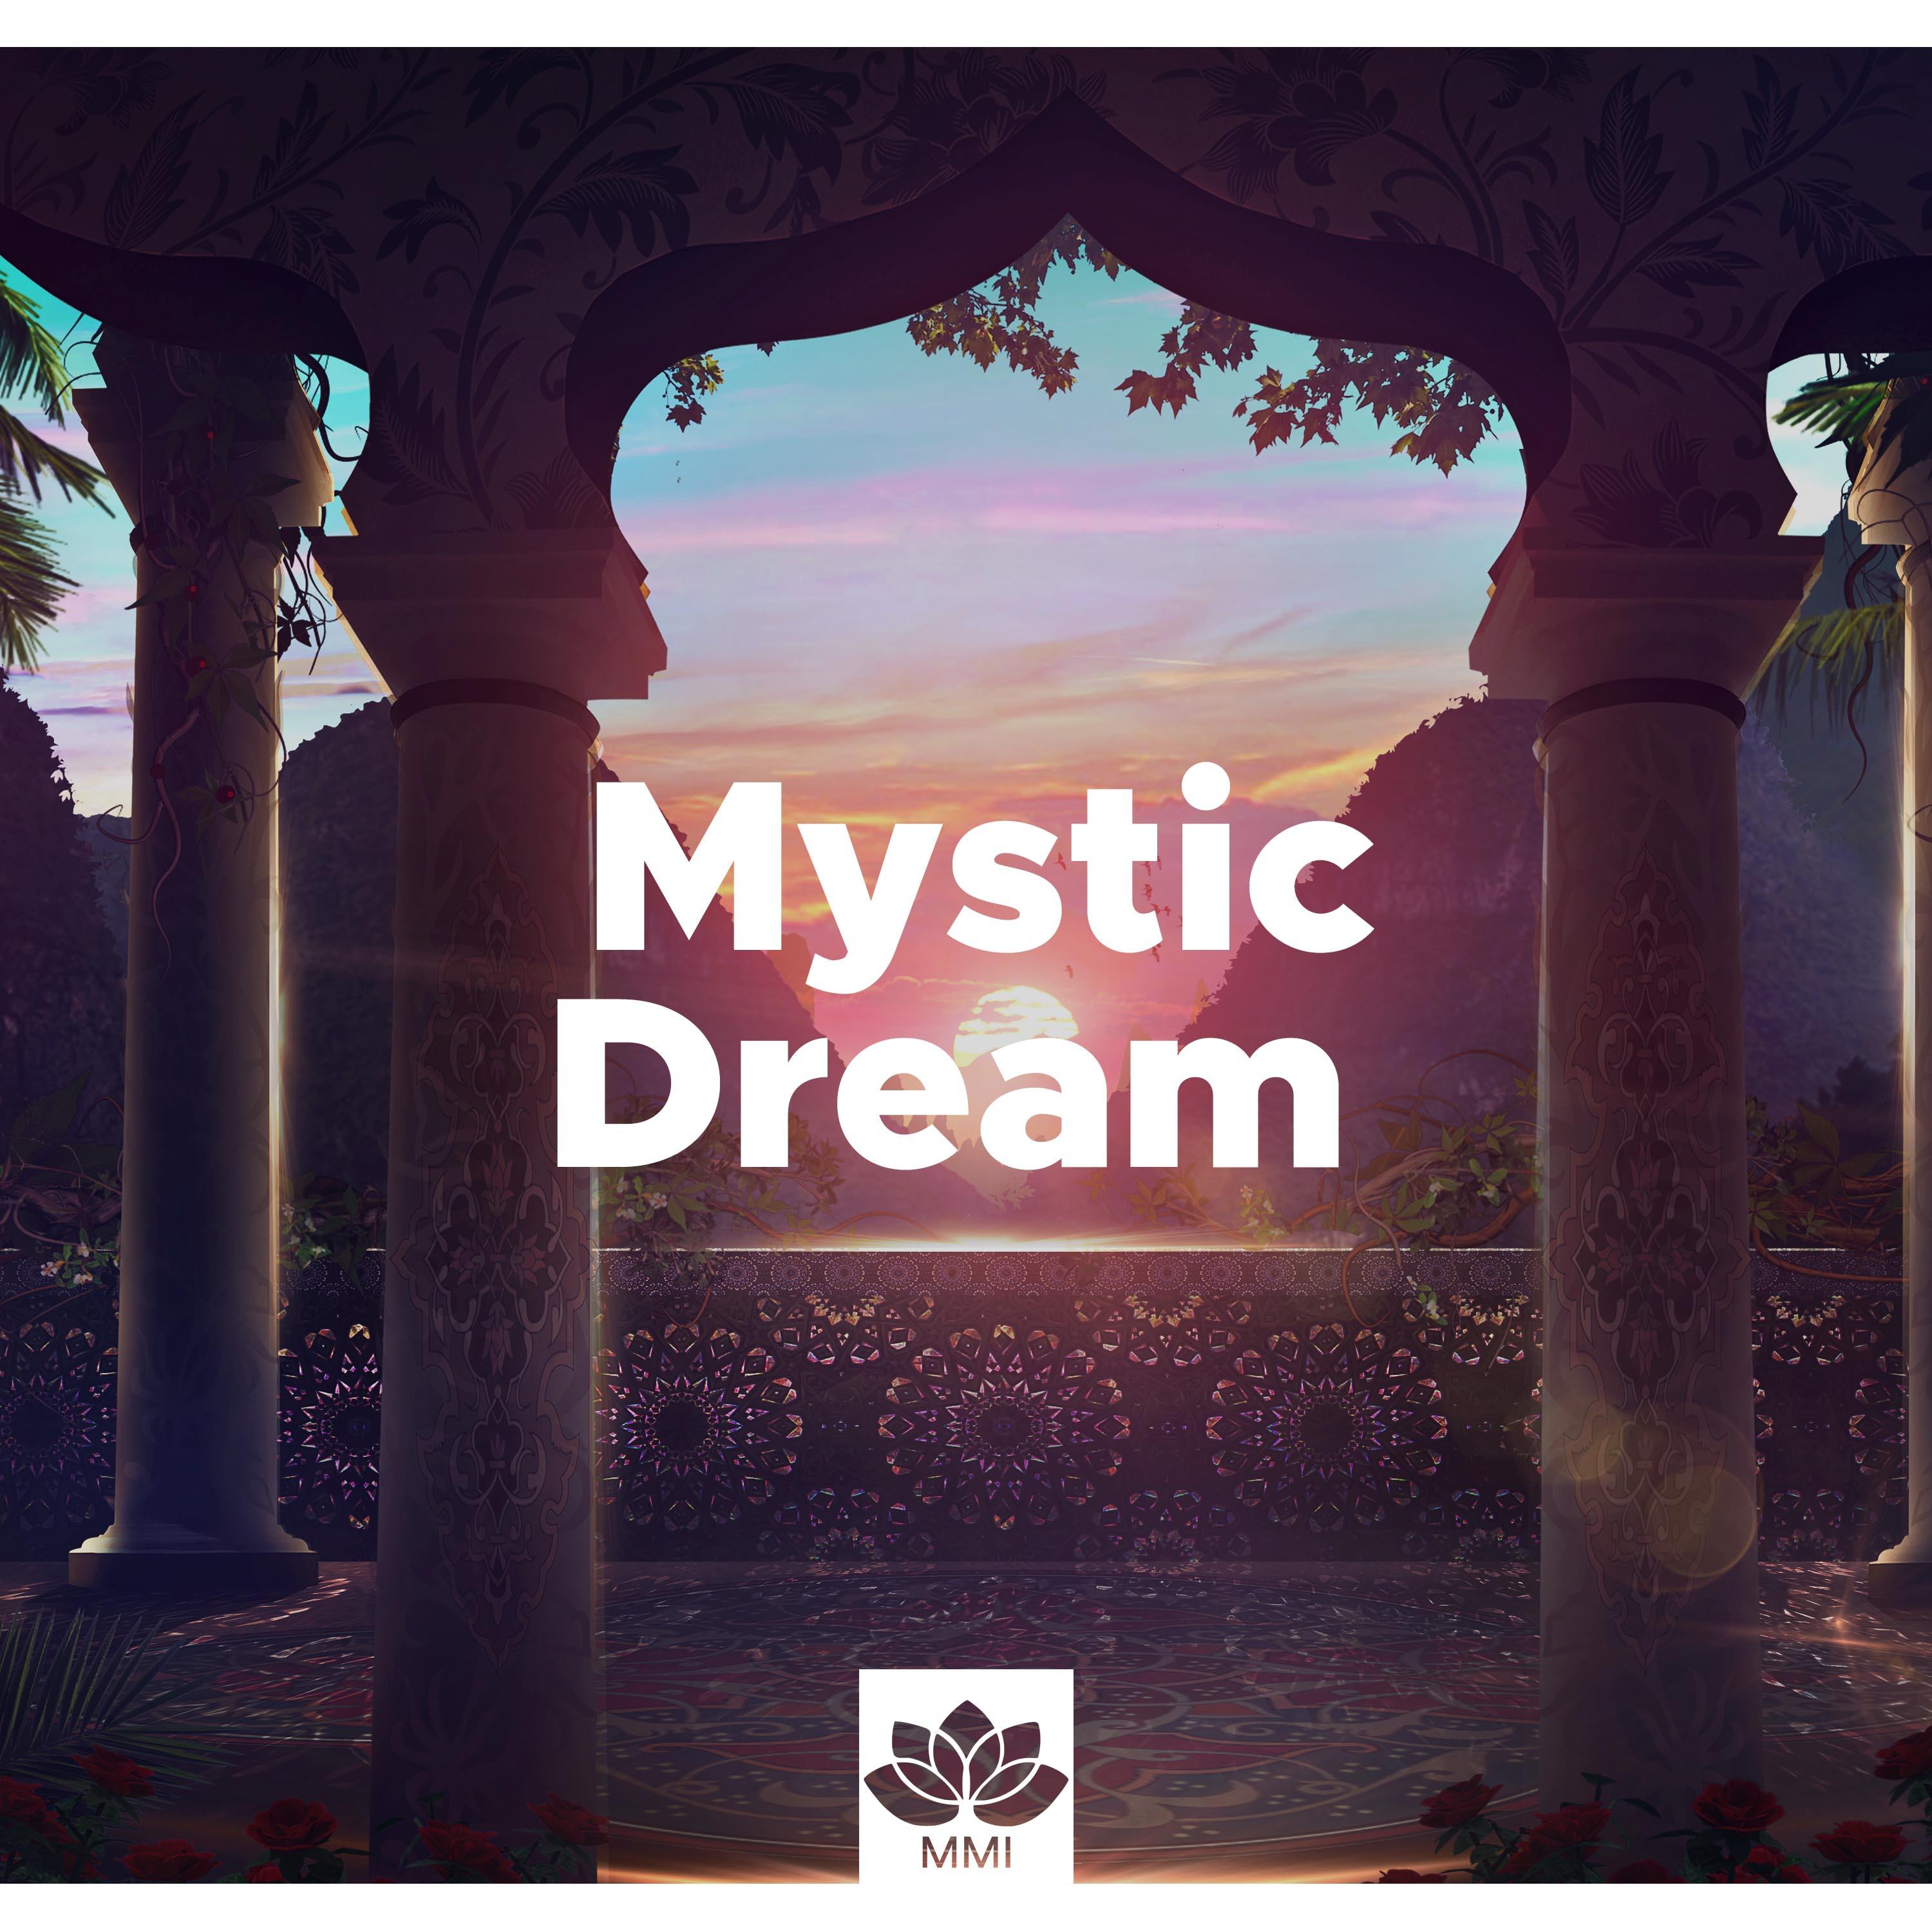 Mystic Dream - Deep Sleep Music with Nature Sounds, Piano, Flute